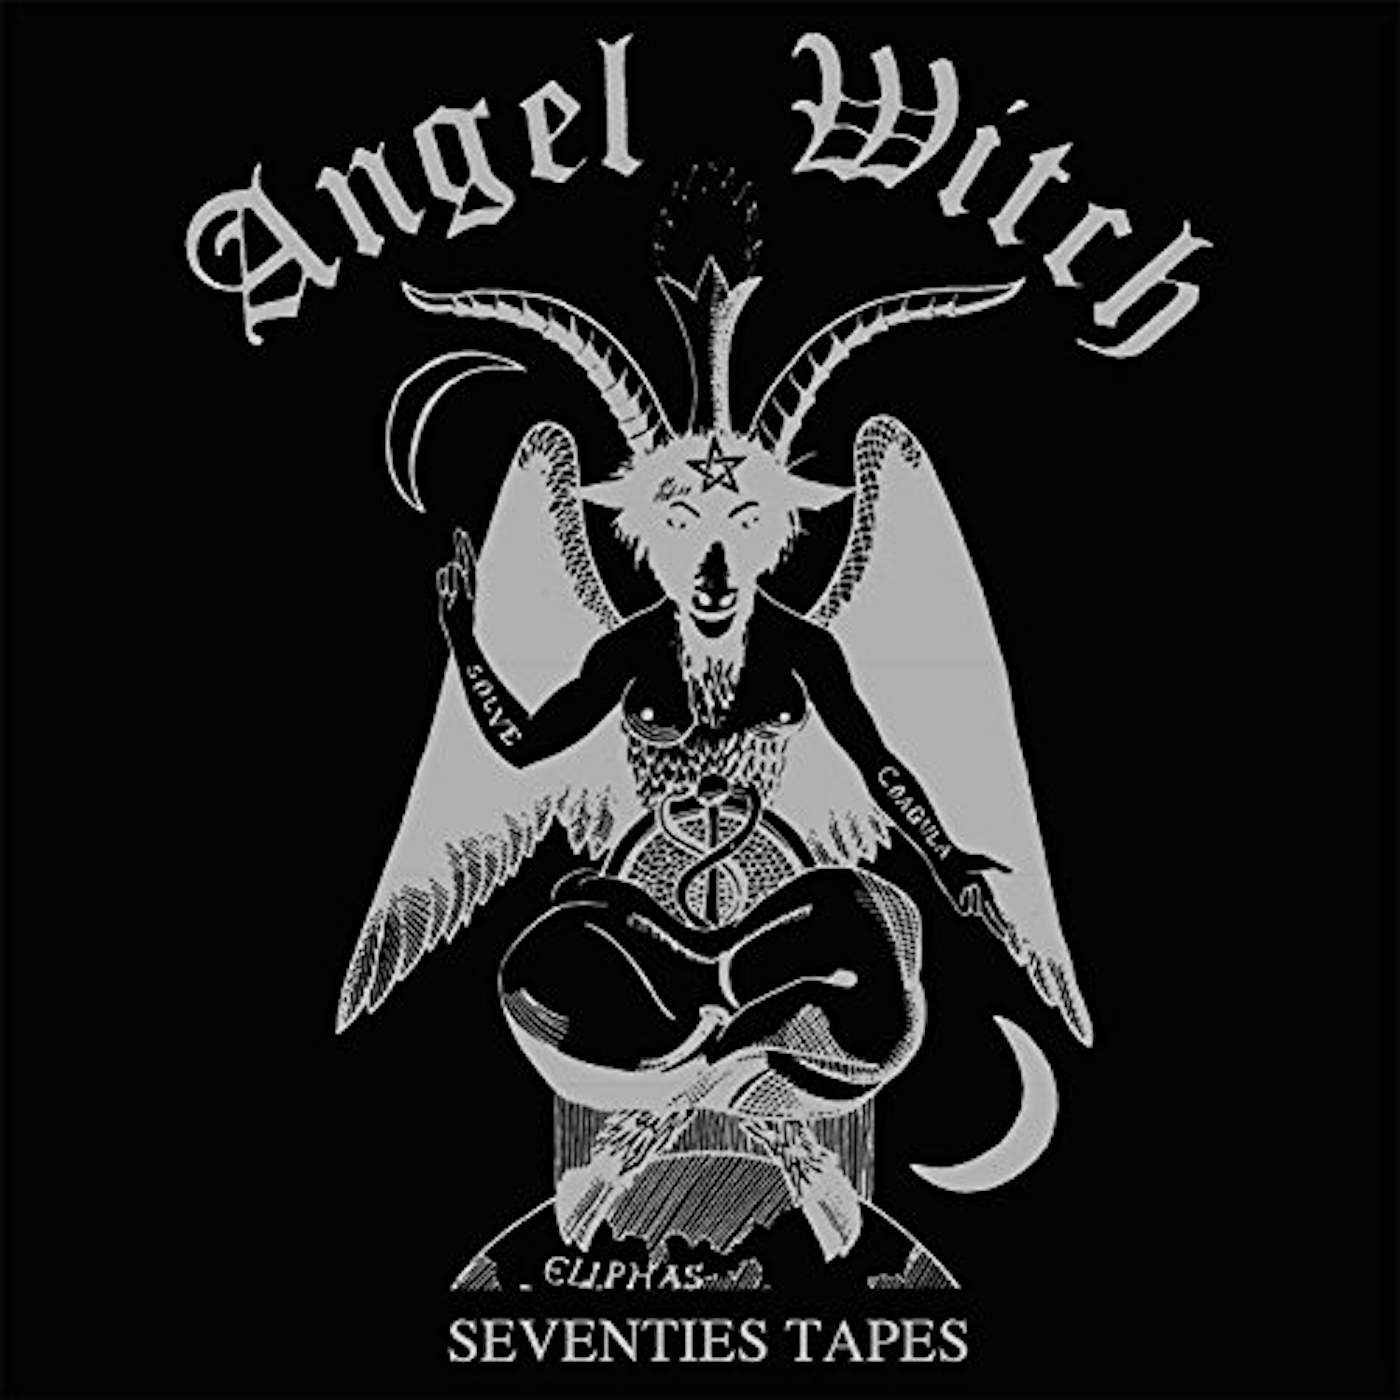 Angel Witch SEVENTIES TAPES Vinyl Record